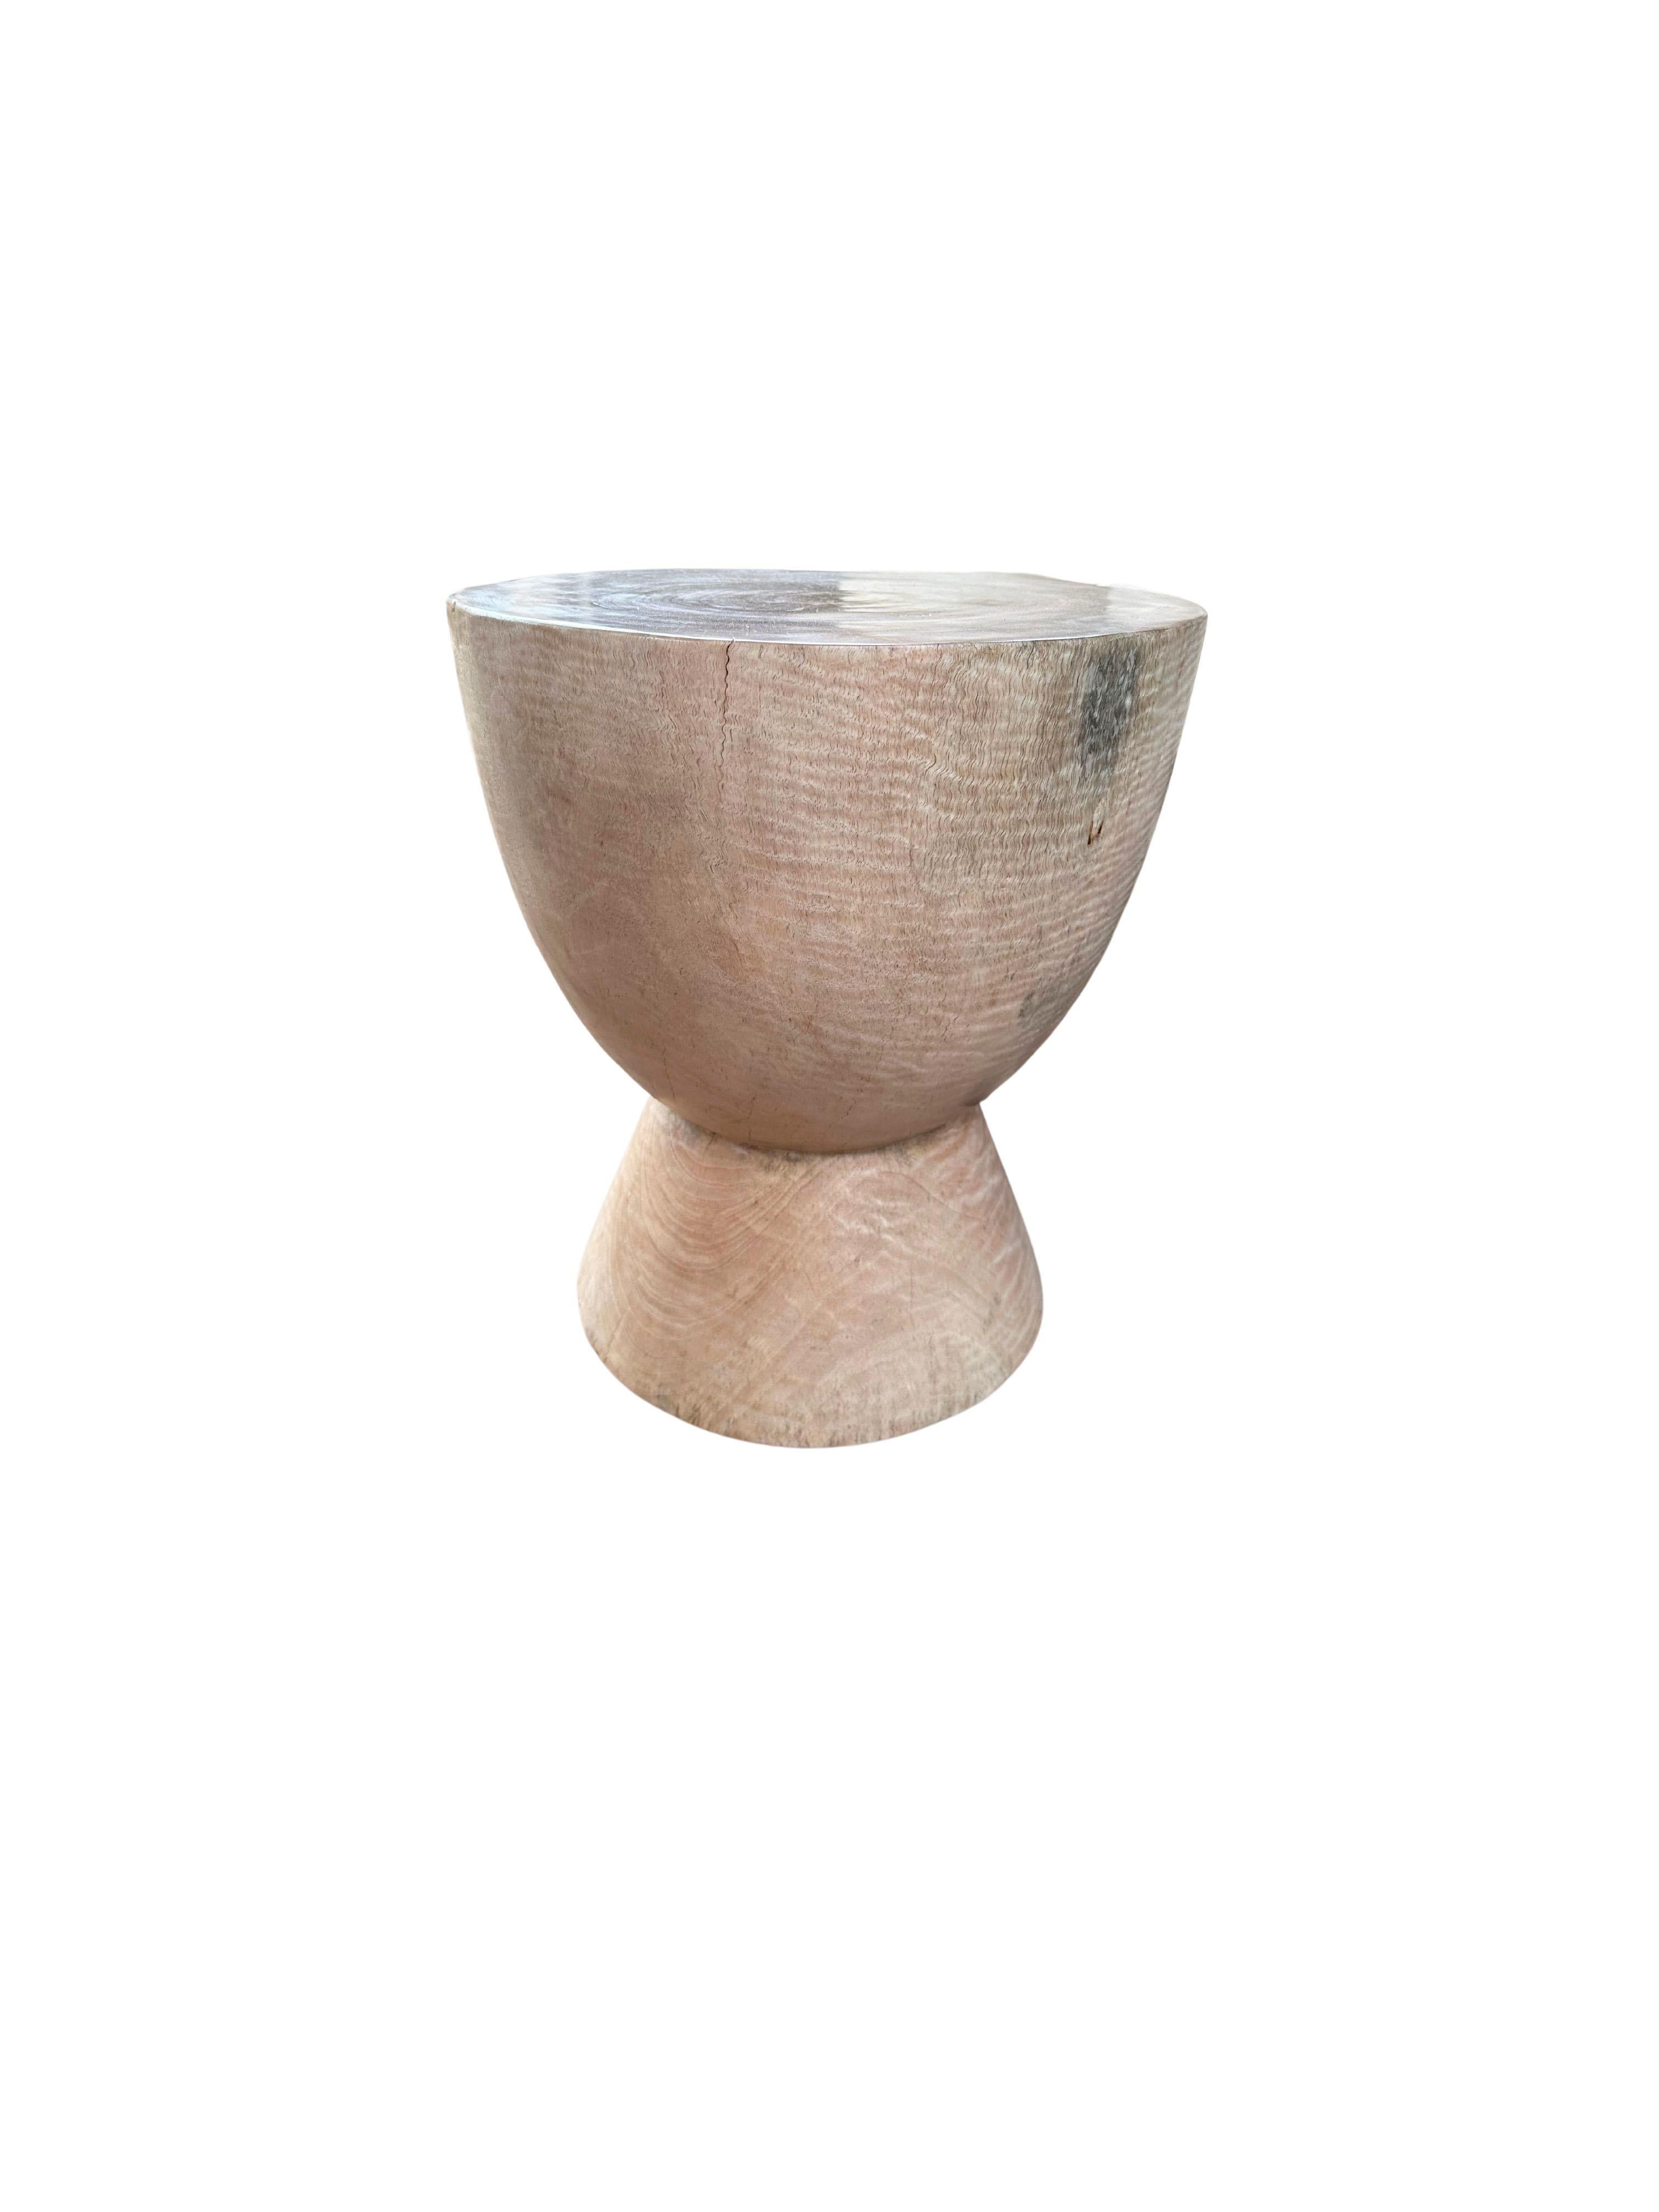 Organic Modern Sculptural Side Table Mango Wood Bleached Finish For Sale